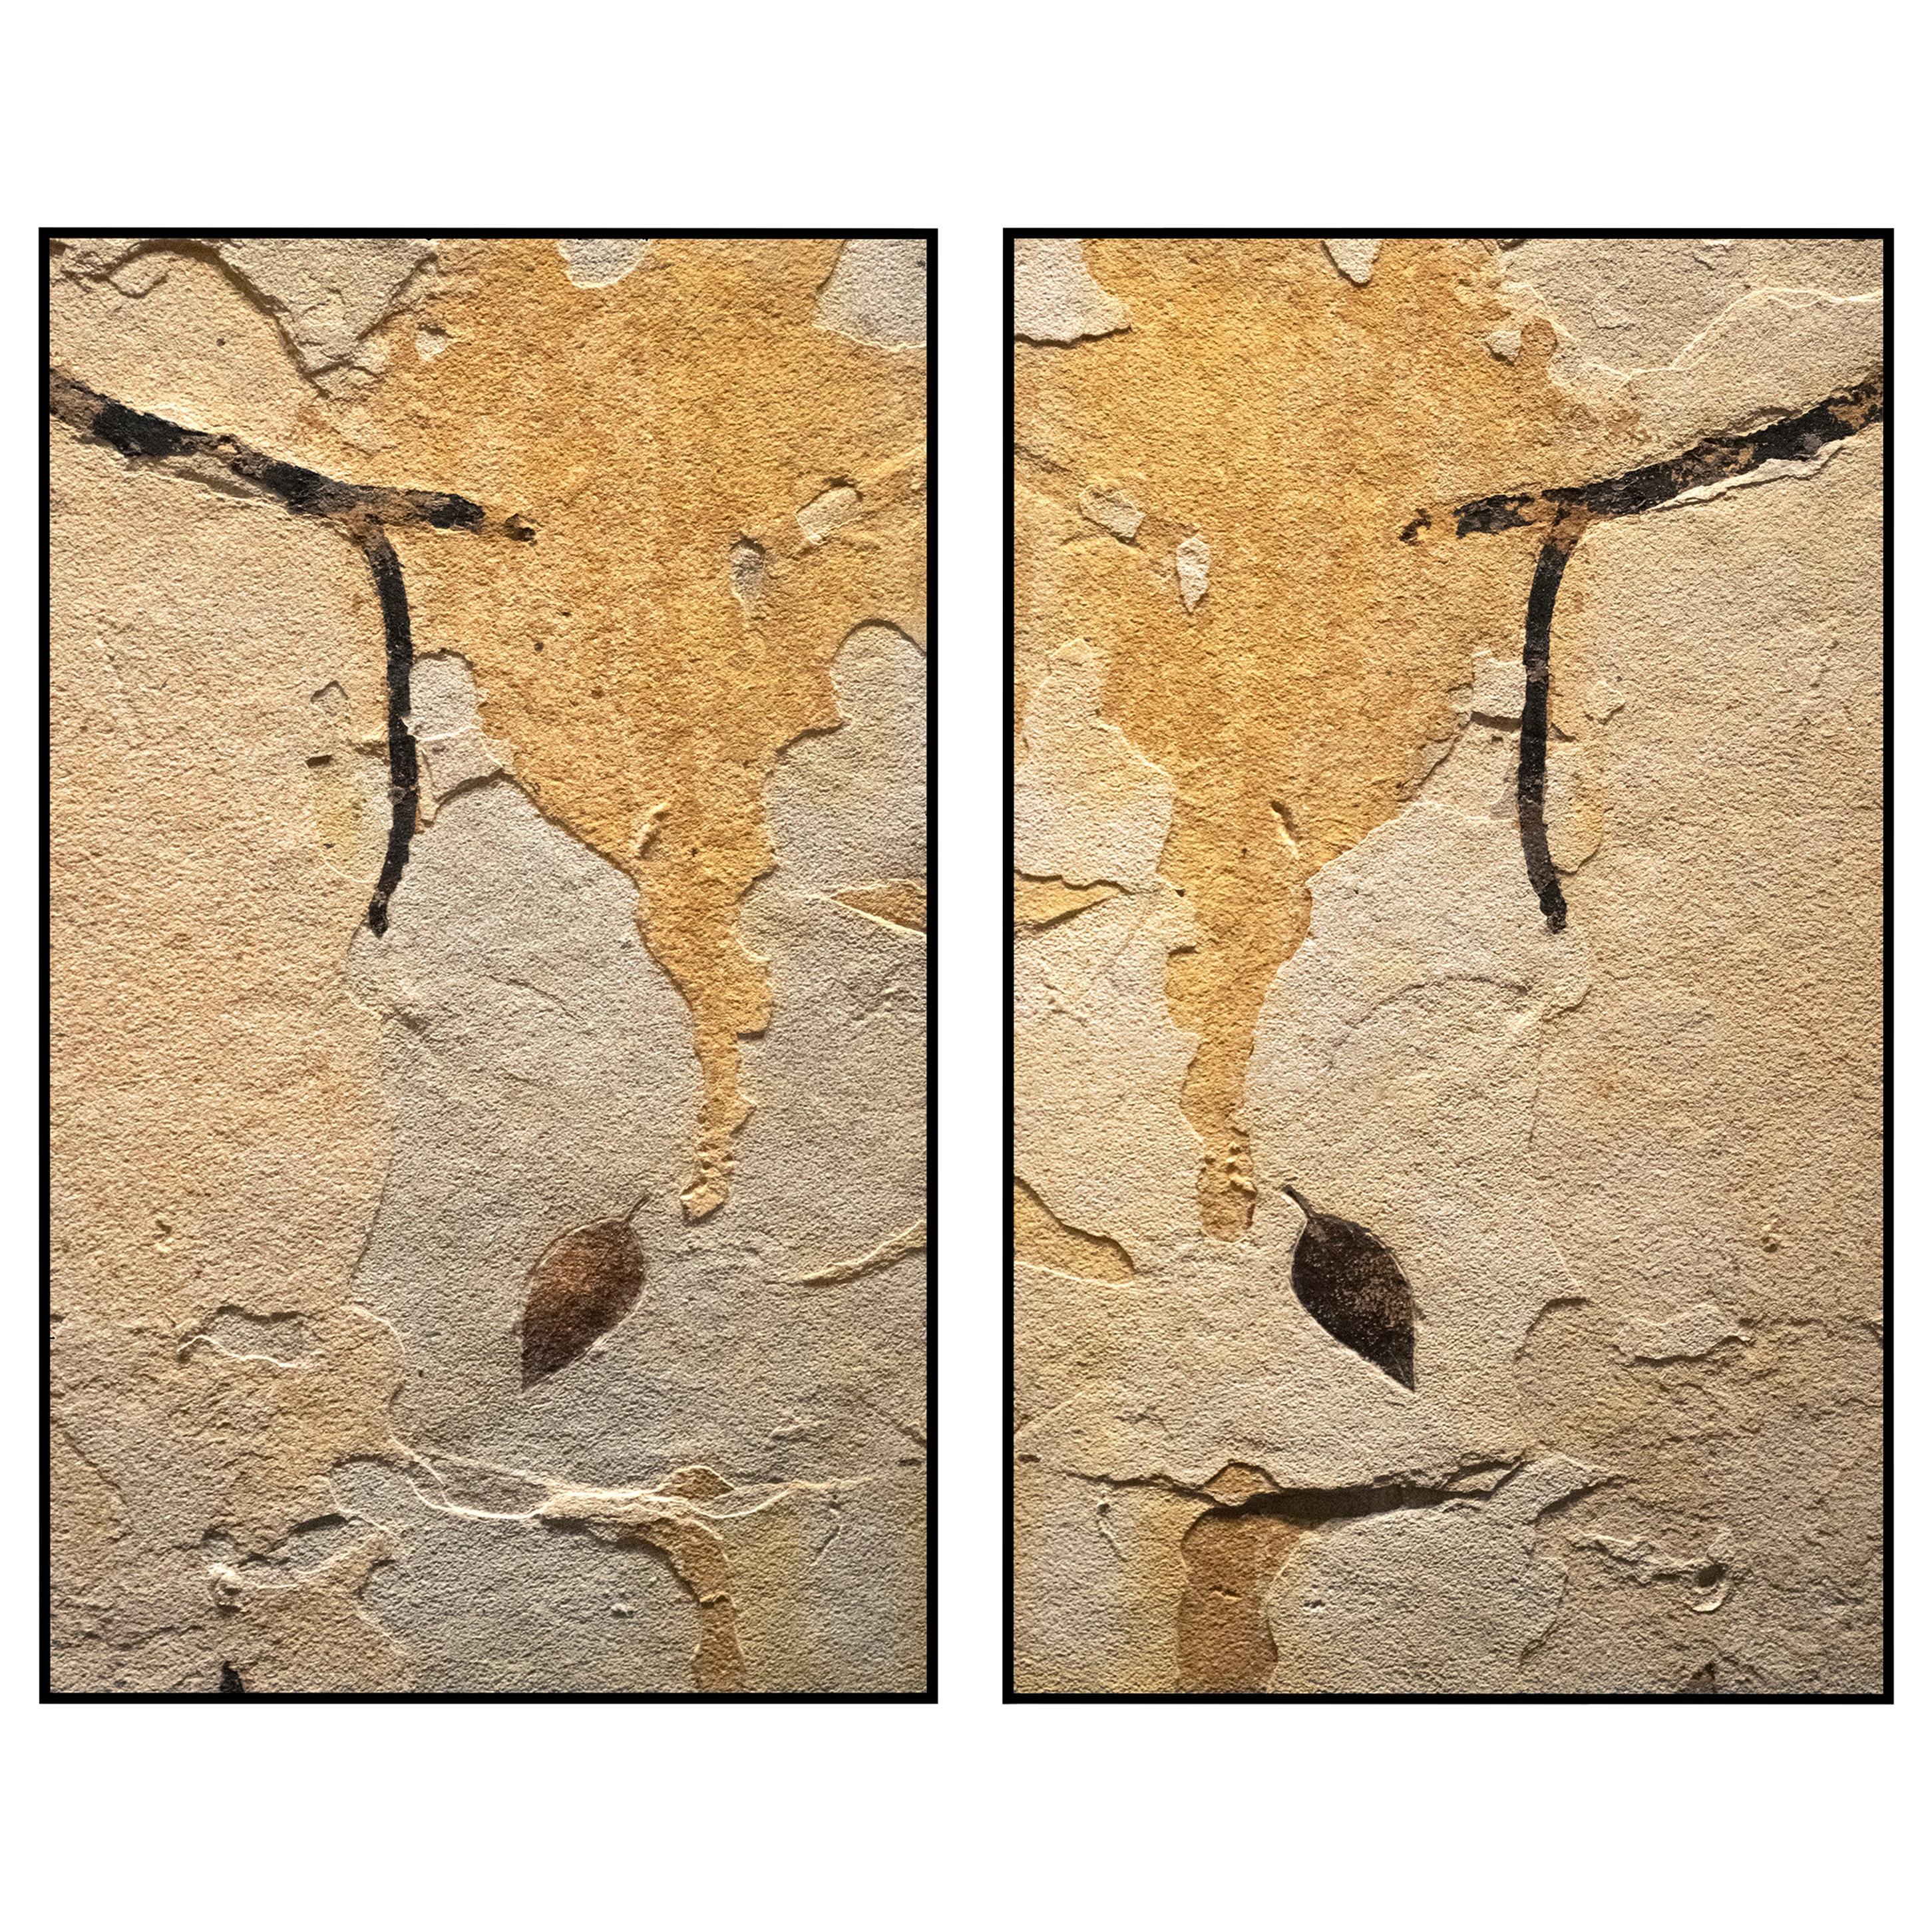 50 Million Year Old Fossil Leaf & Branch Diptych Mural in Stone, from Wyoming